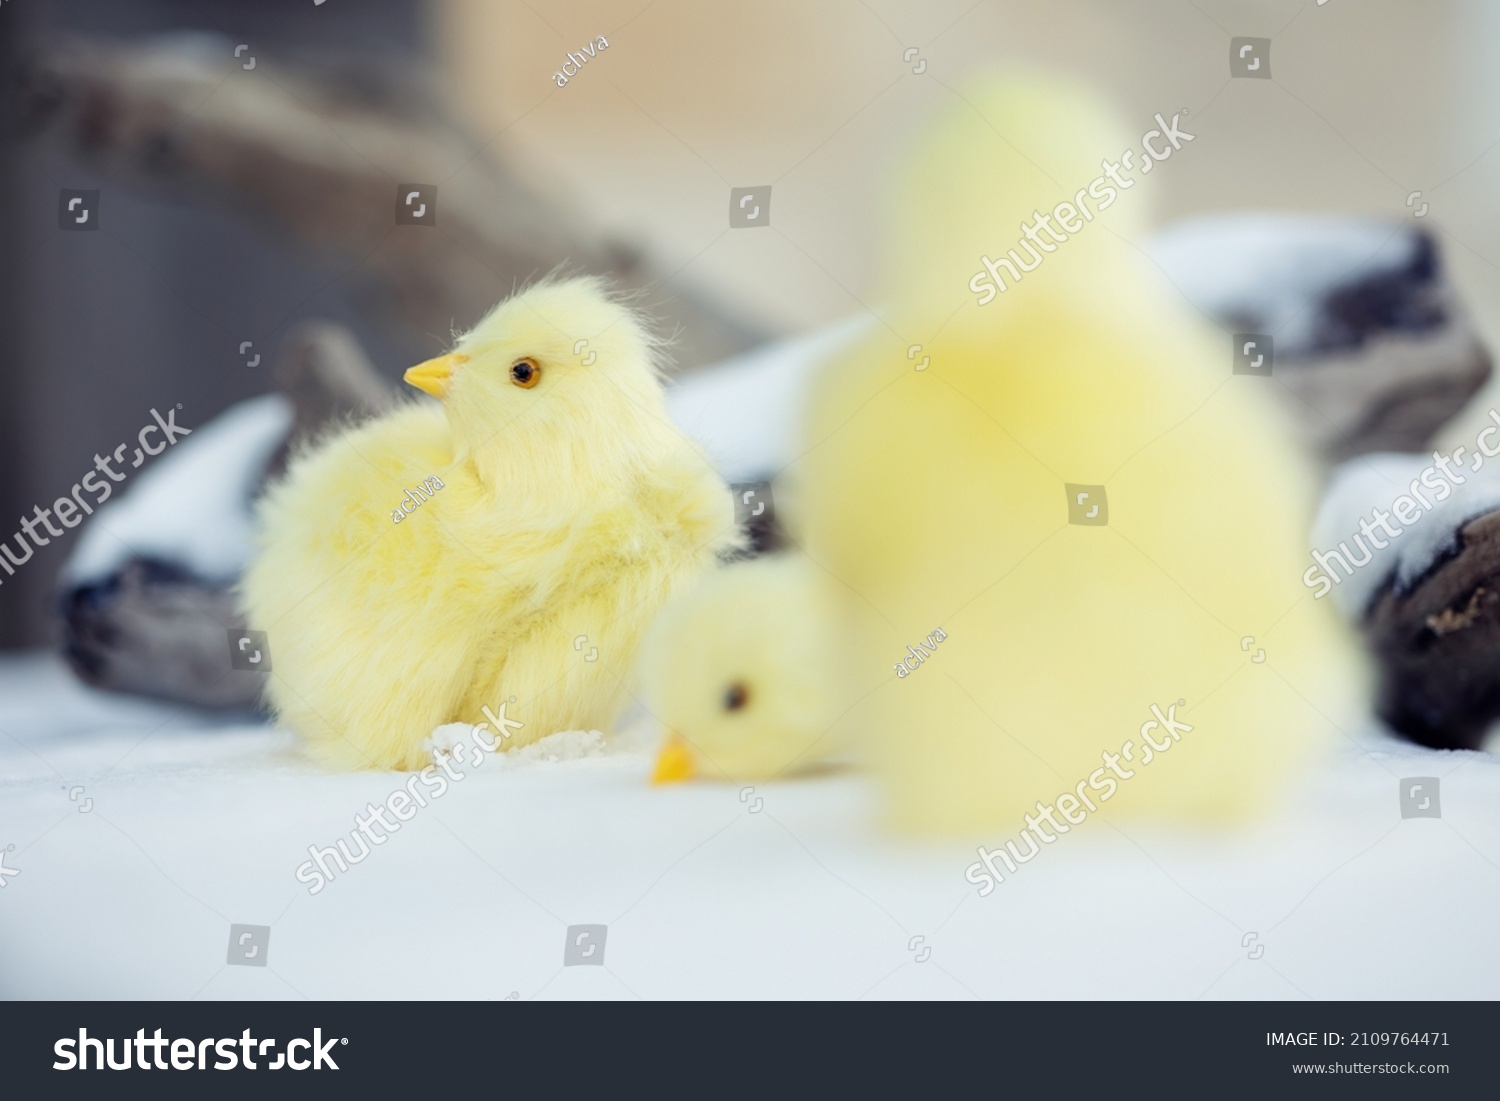 stock-photo-chicks-looking-for-food-in-the-snow-in-nature-in-the-background-you-see-a-tree-wit...jpg